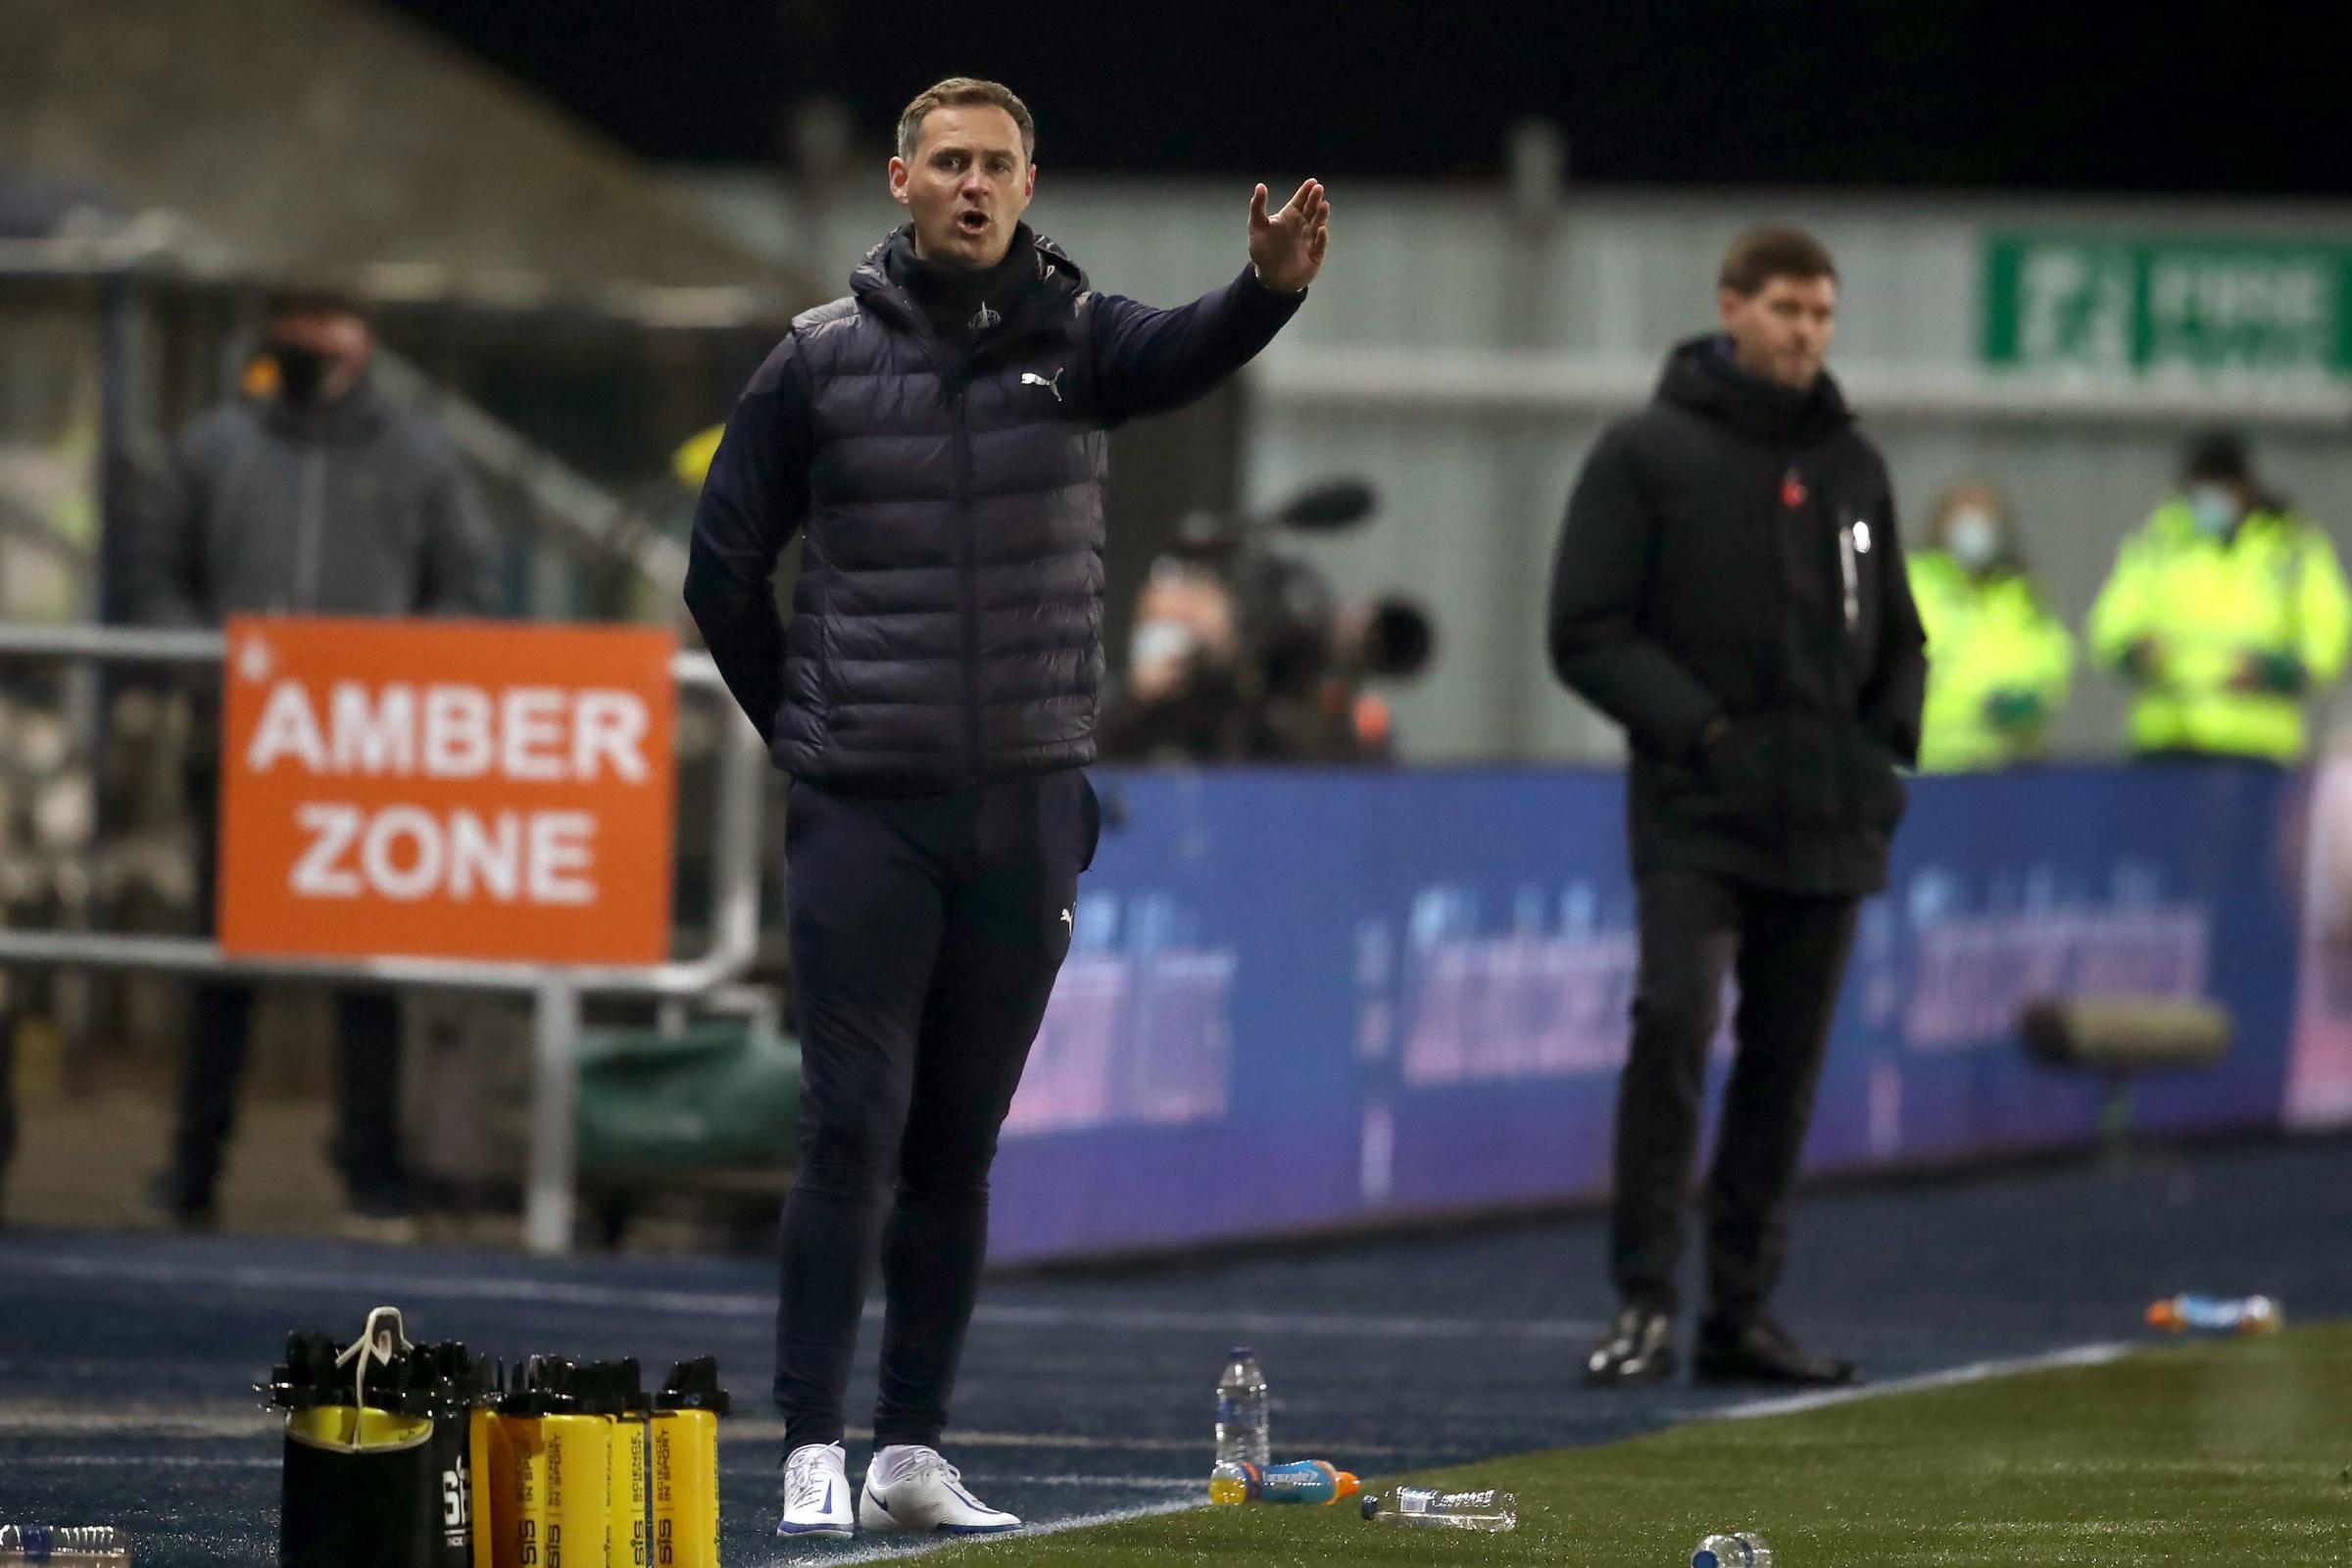 David McCracken on Rangers' levels and the learning experience for Falkirk after cup defeat